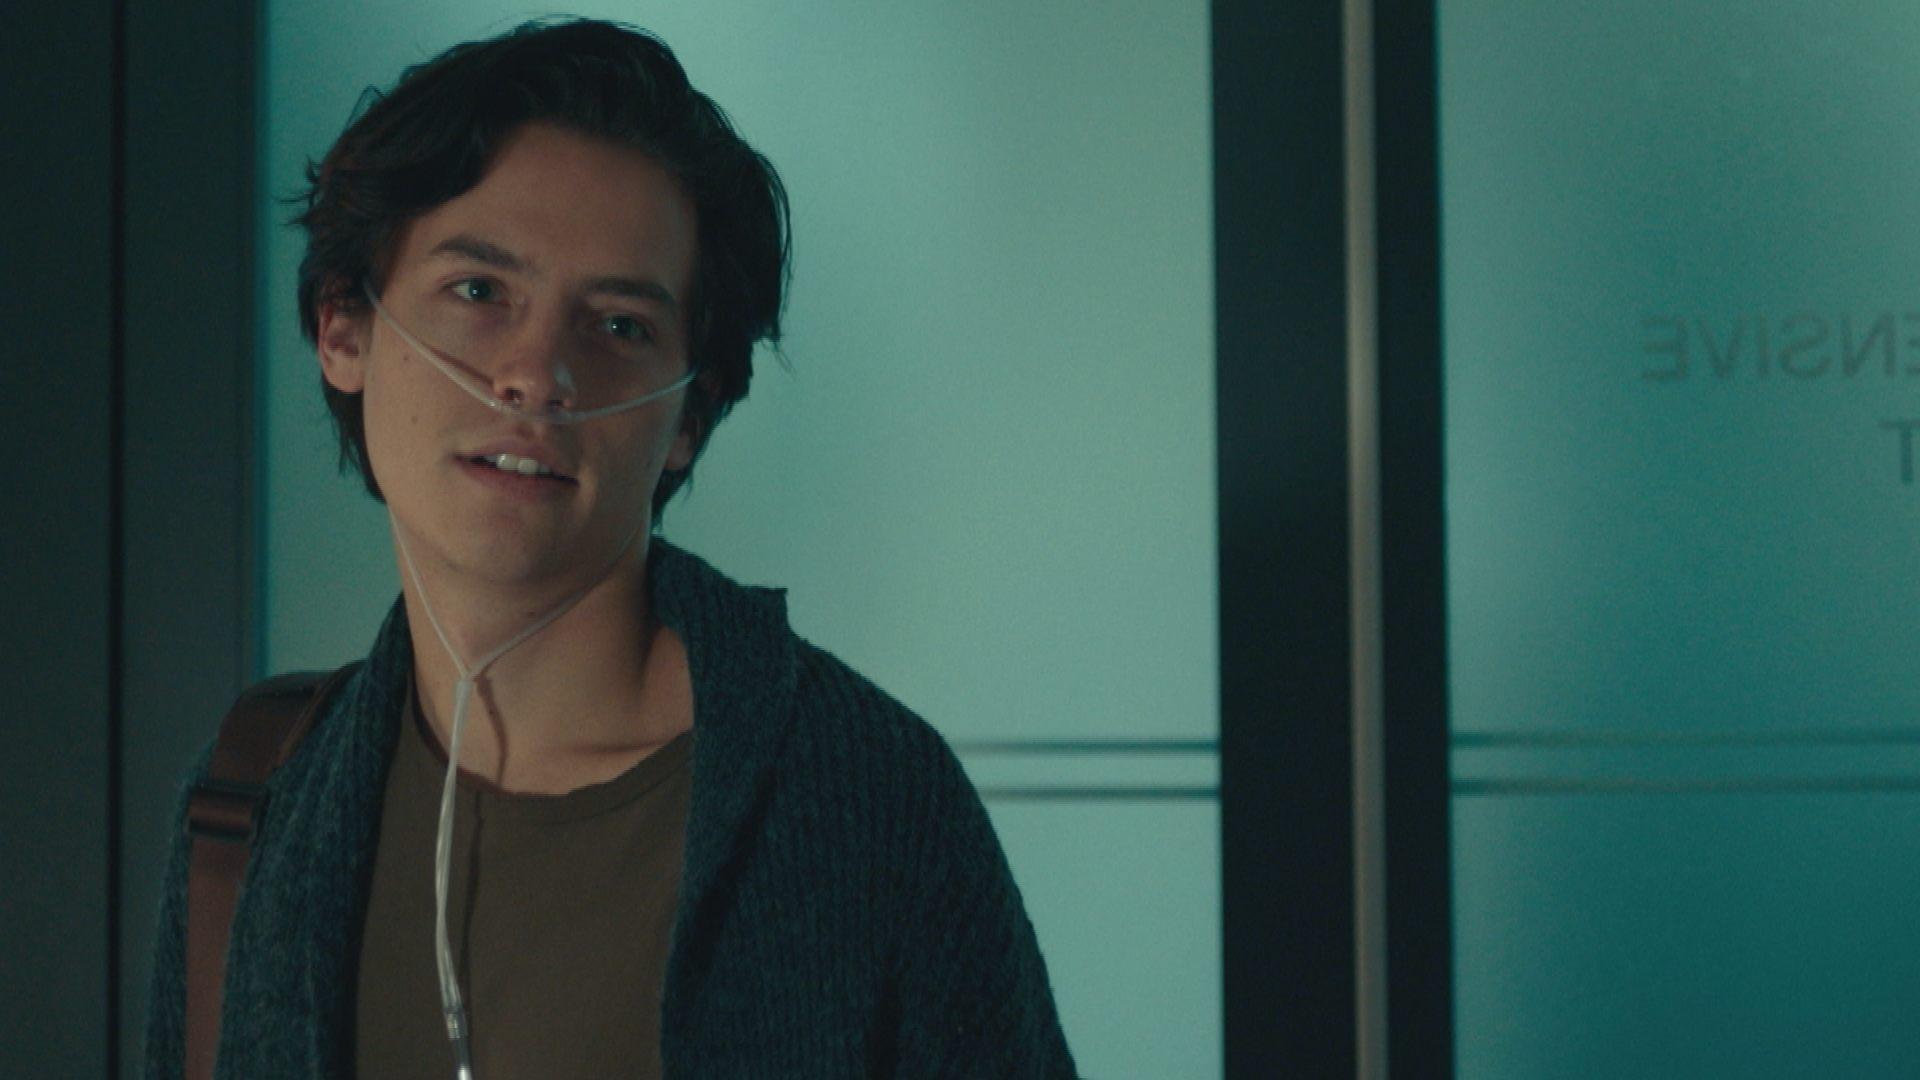 Cole Sprouse Flirts With Haley Lu Richardson in 'Five Feet Apart